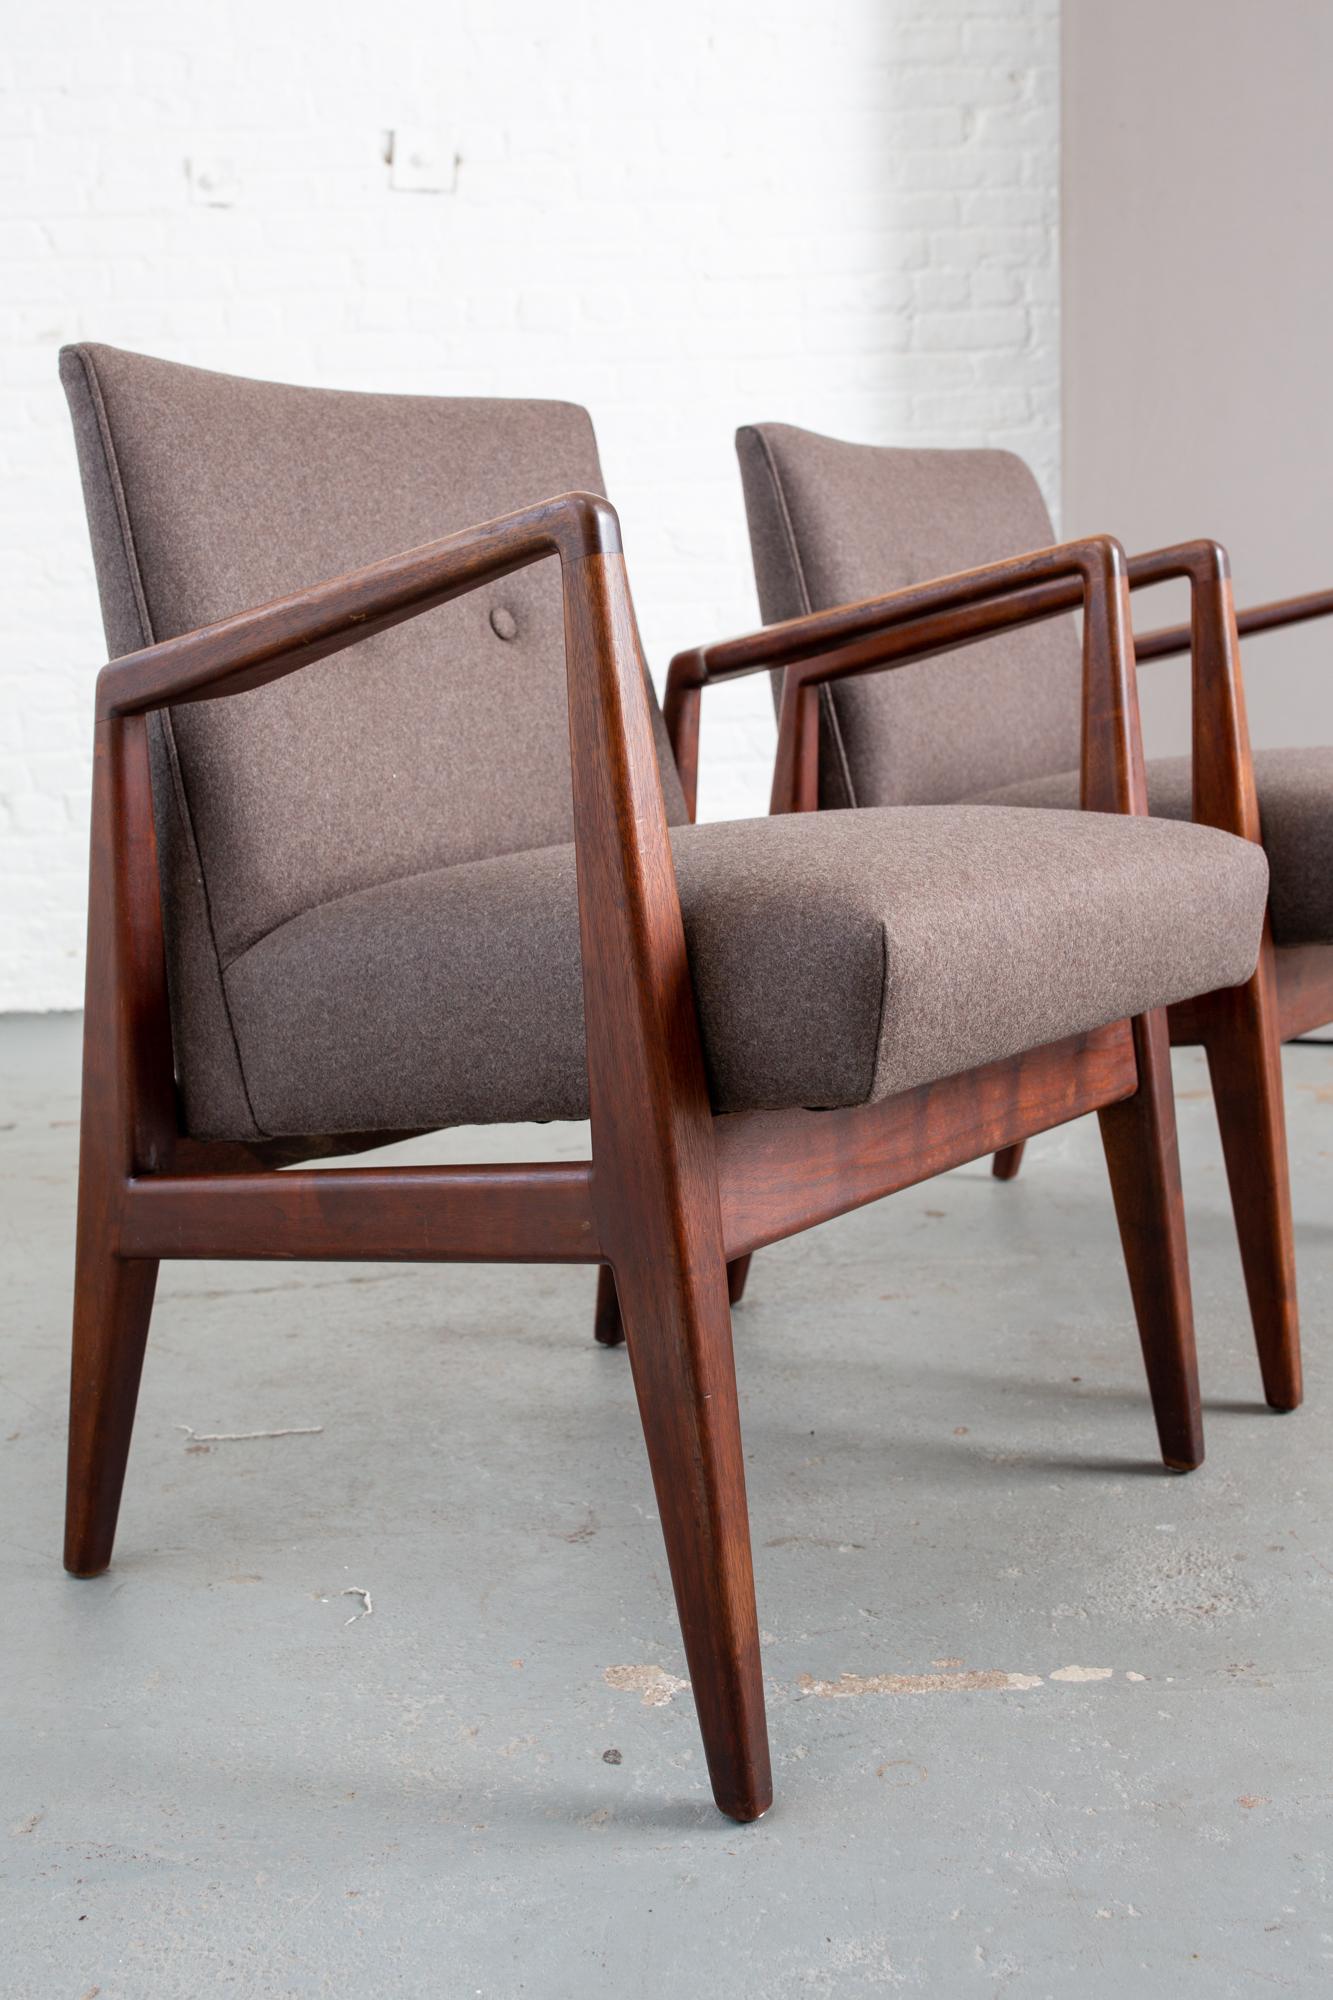 Mid-20th Century Pair of Jens Risom Mid-Century Modern Armchairs For Sale